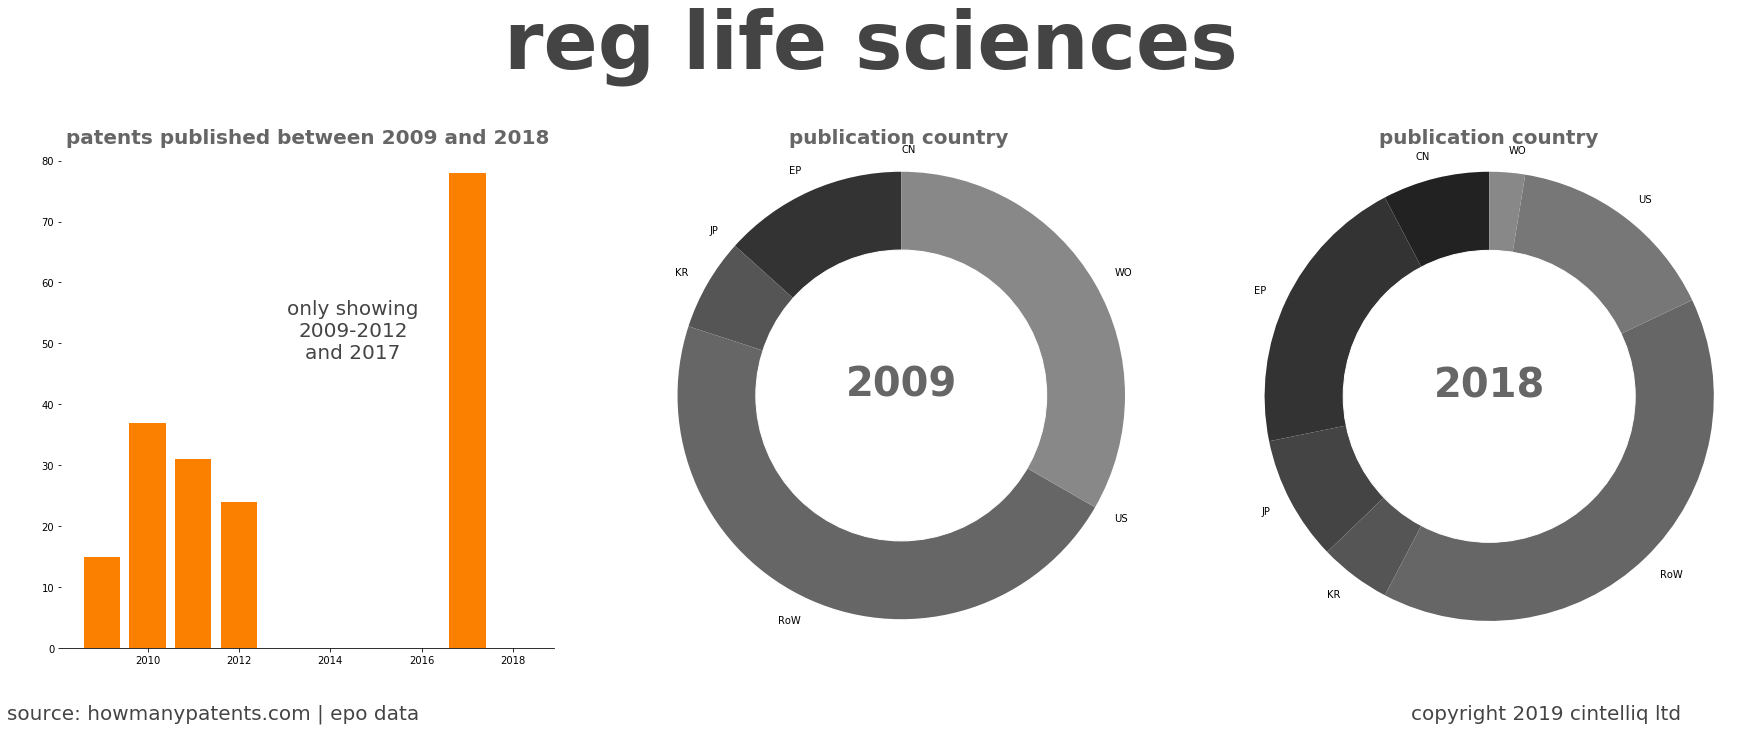 summary of patents for Reg Life Sciences